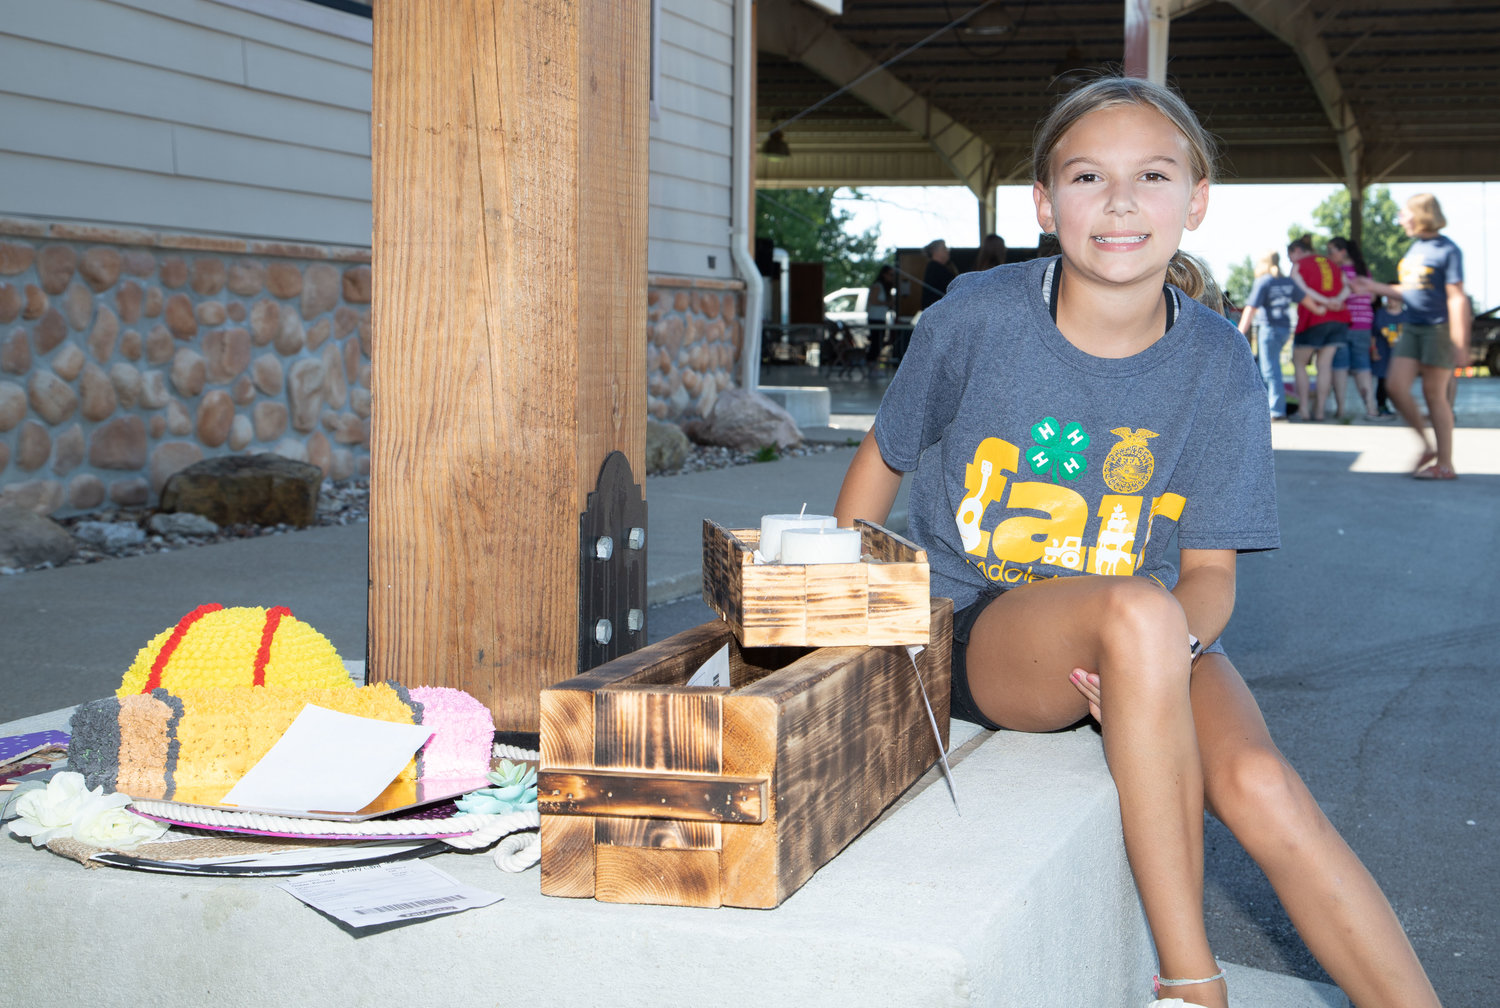 Kensley Goble, of Huntsville, sits among the projects she submitted for judging Monday at the Randolph County Fair in Moberly’s Rothwell Park. Goble decorated two foam cakes and created a wood planter and a decorative candle holder.